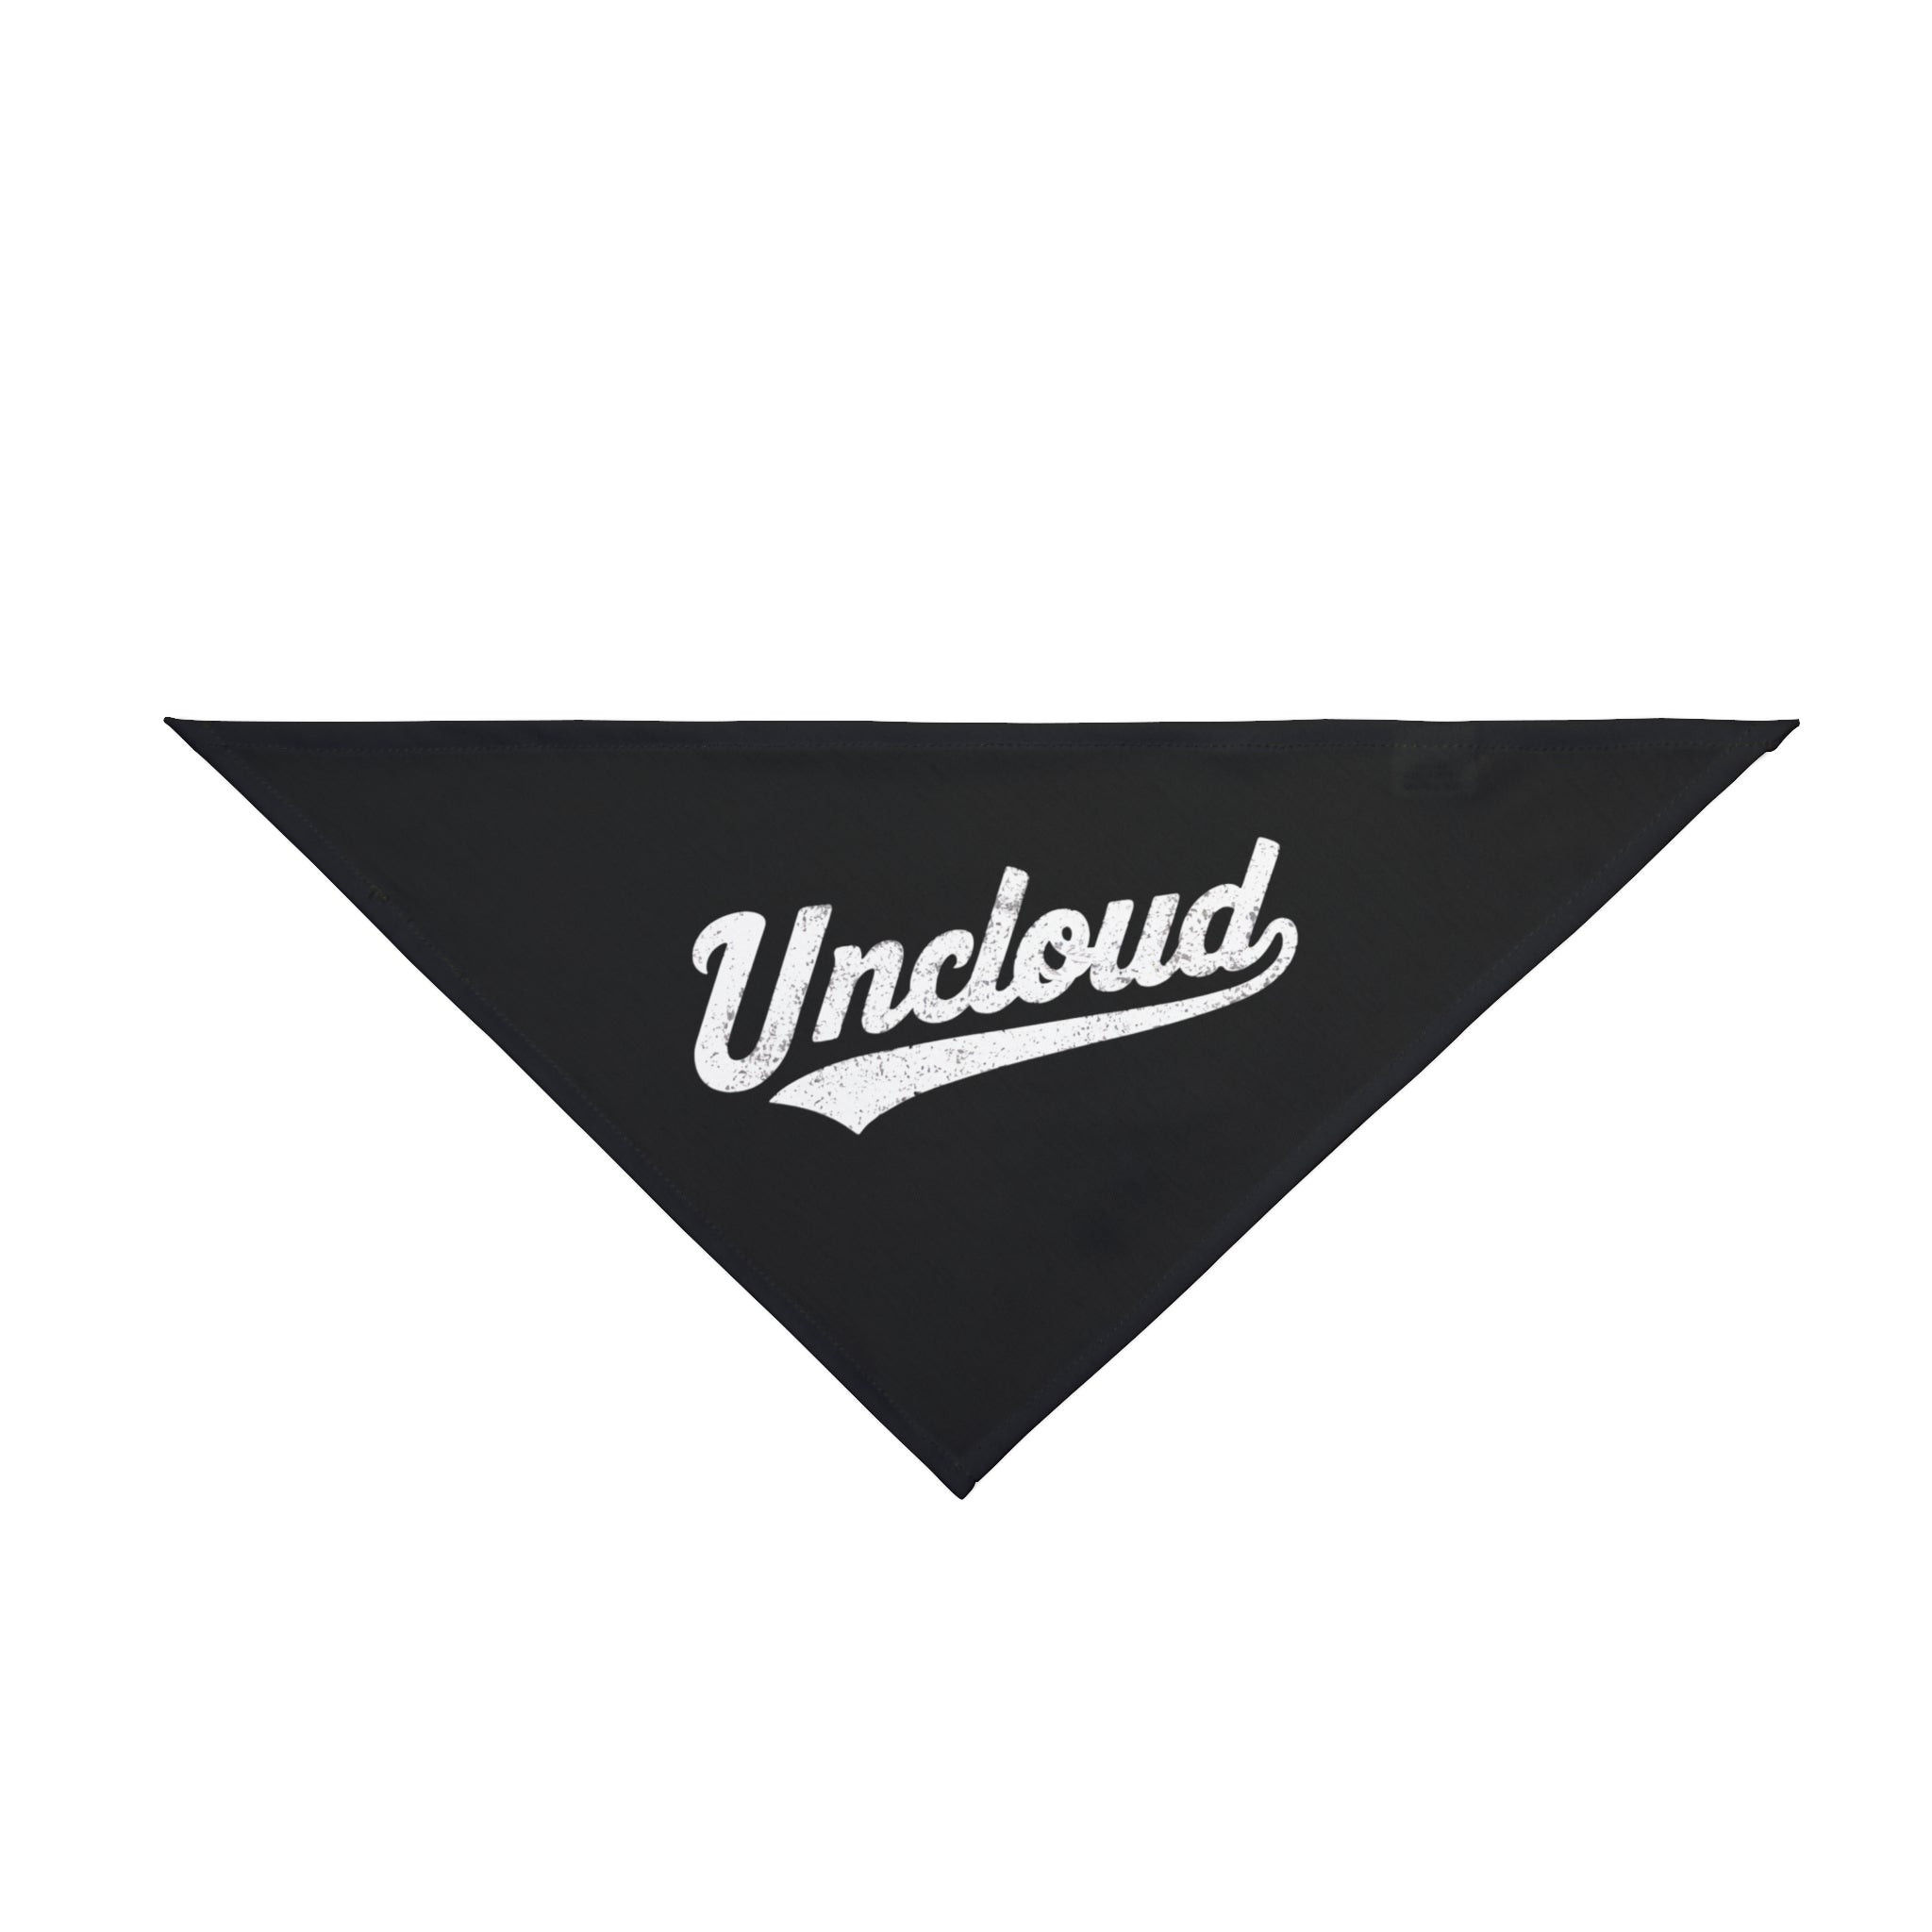 A soft-spun polyester black triangular bandana with the word "Uncloud" written in white script across the front, offering both skin protection and style. The Uncloud - Pet Bandana is perfect for your pet's adventures or for adding a unique touch to your outfit.